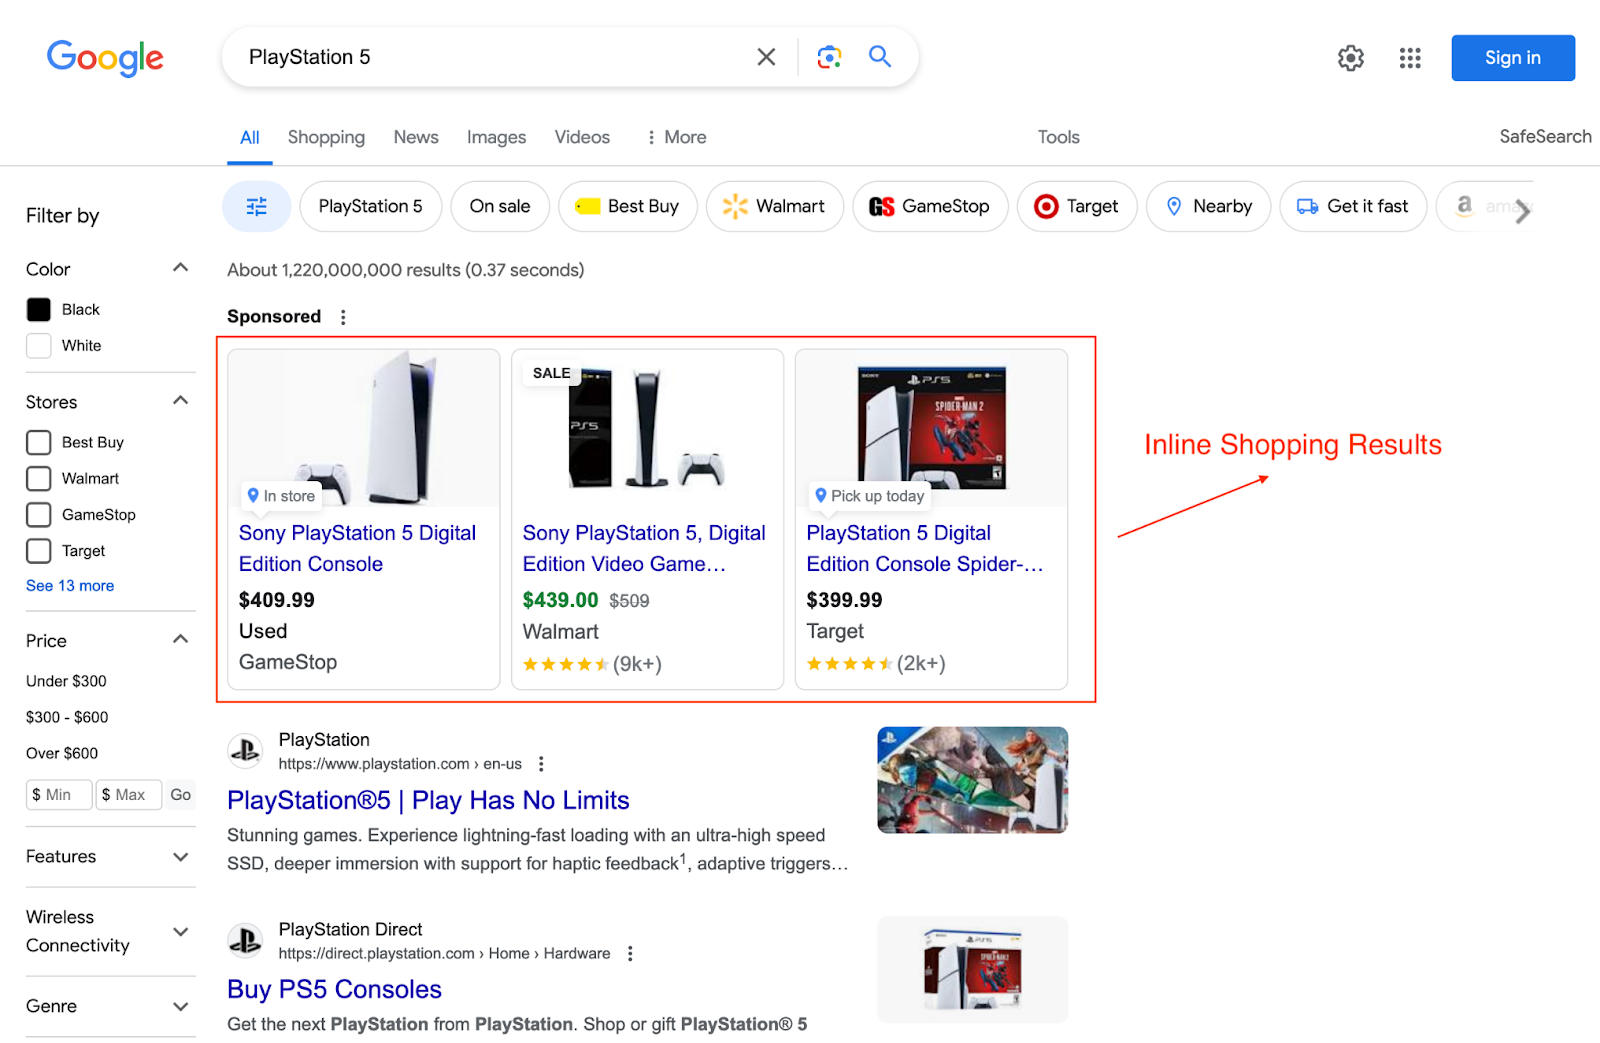 How to Scrape Google Inline Shopping Results